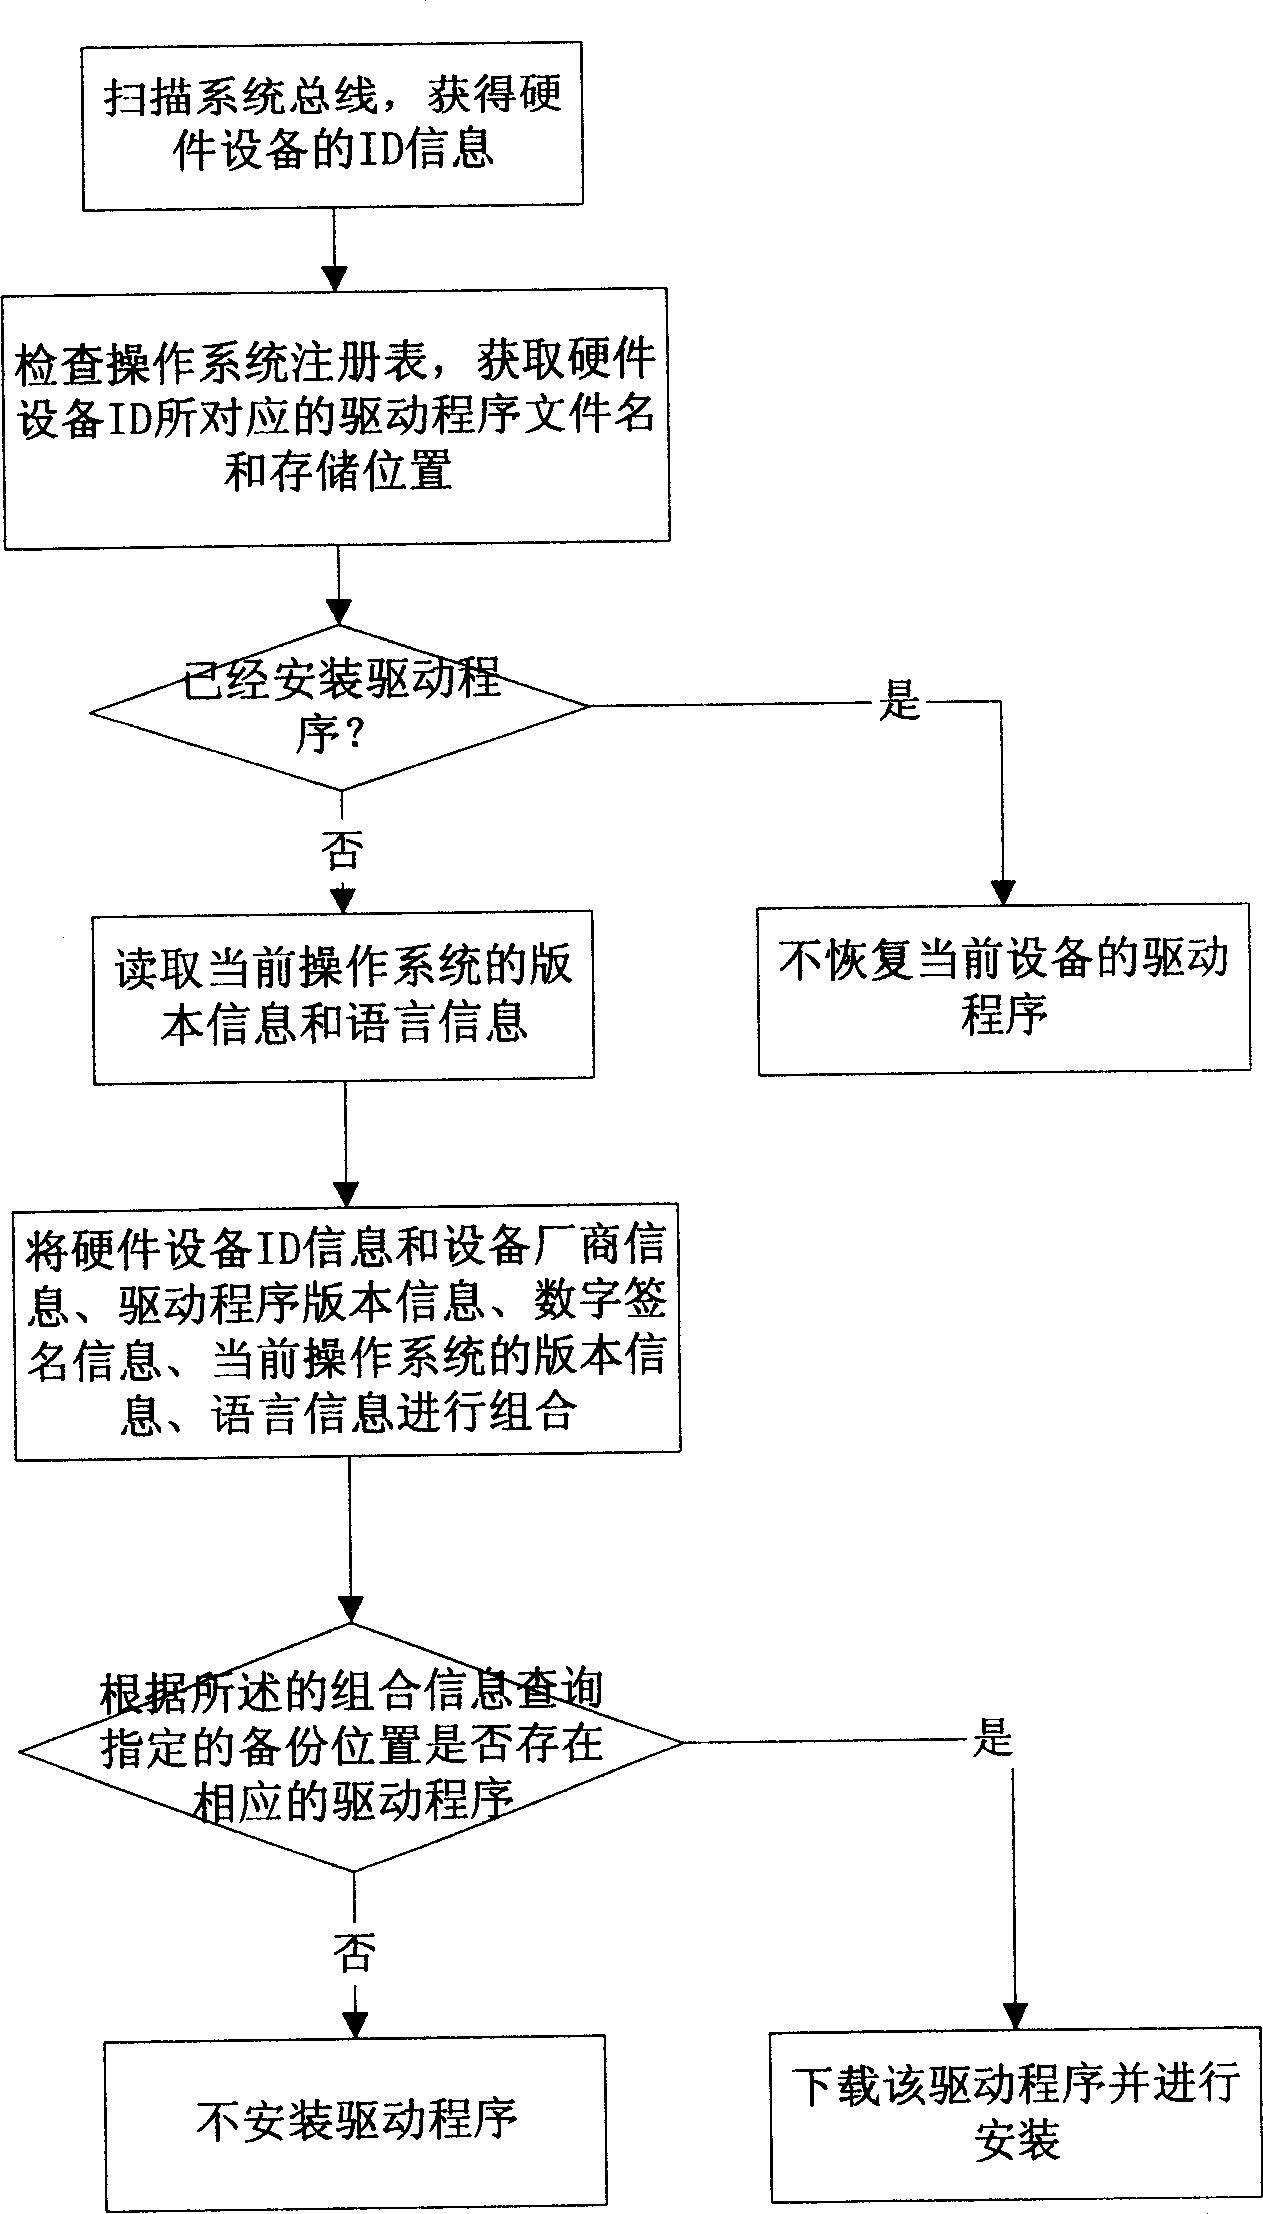 Automatic detesting method for computer system hardware device